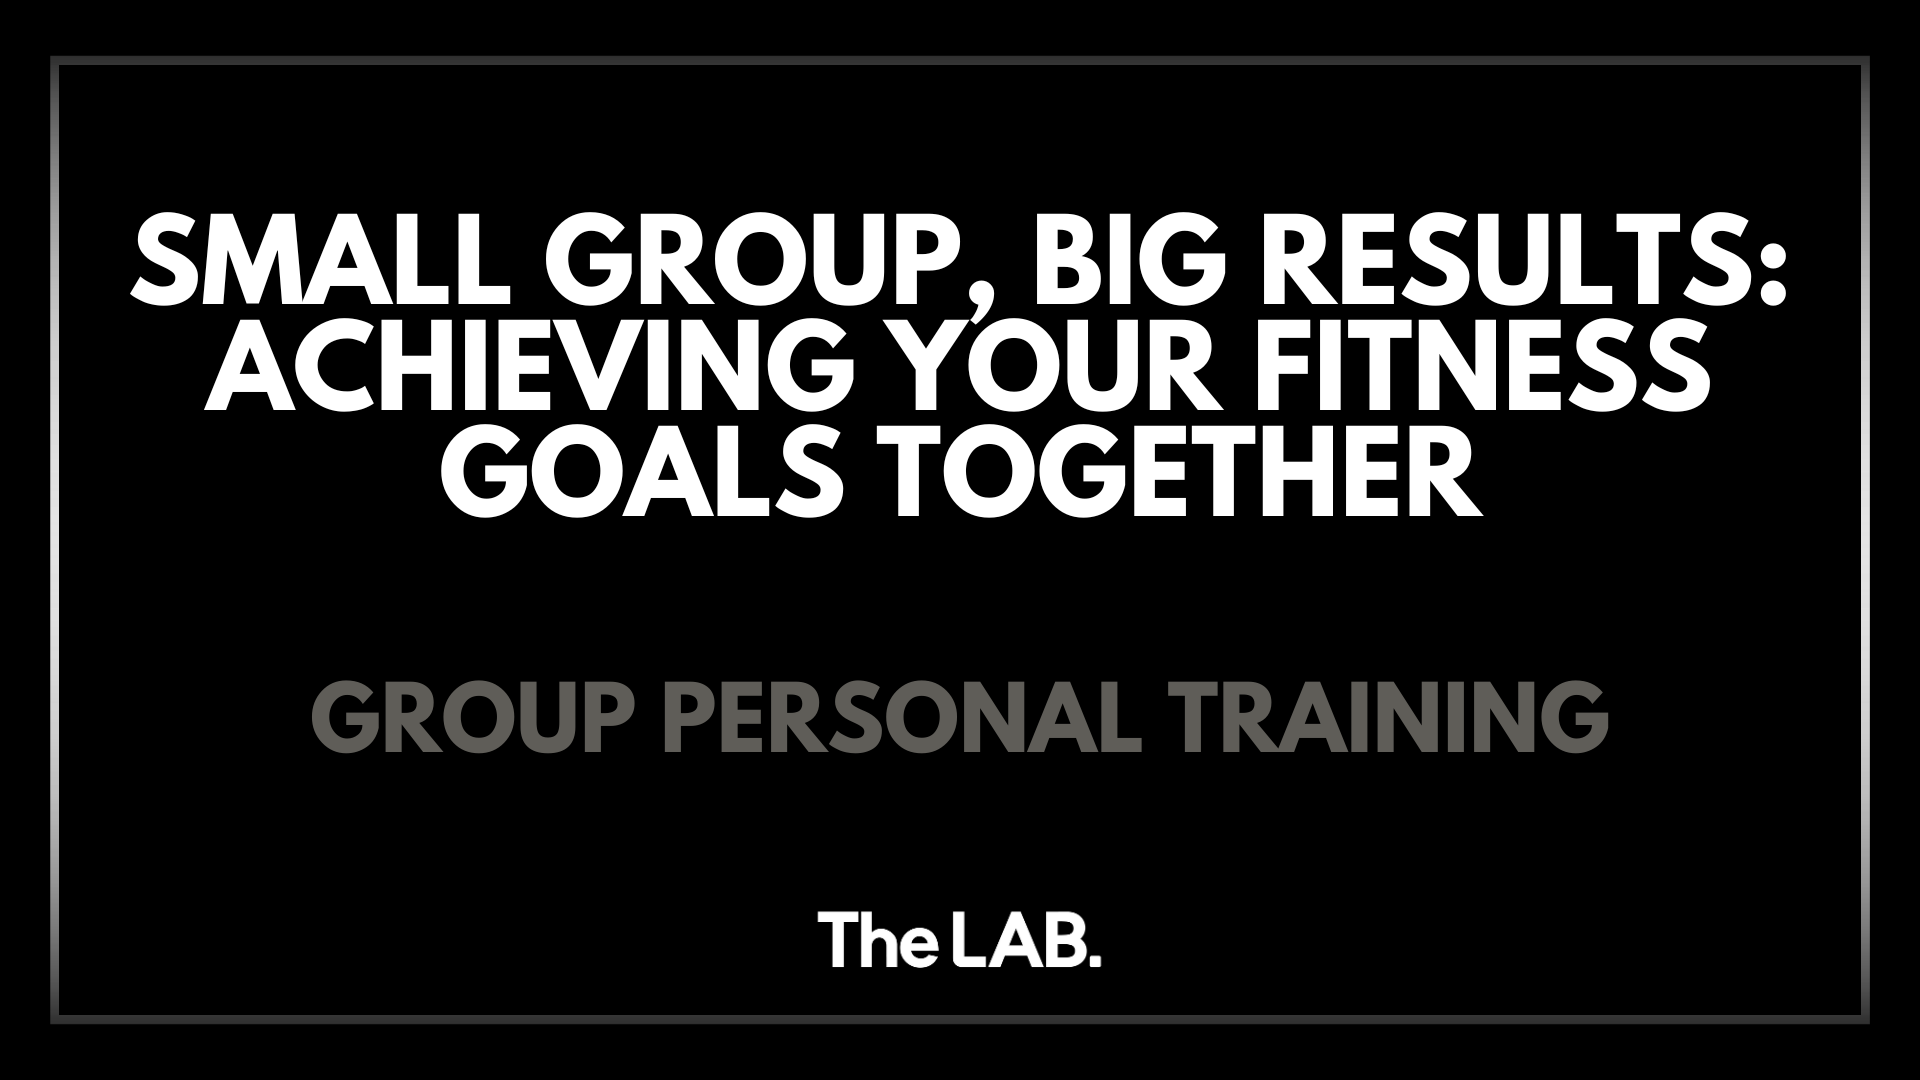 Small Group, Big Results: Achieving Your Fitness Goals Through Group Training